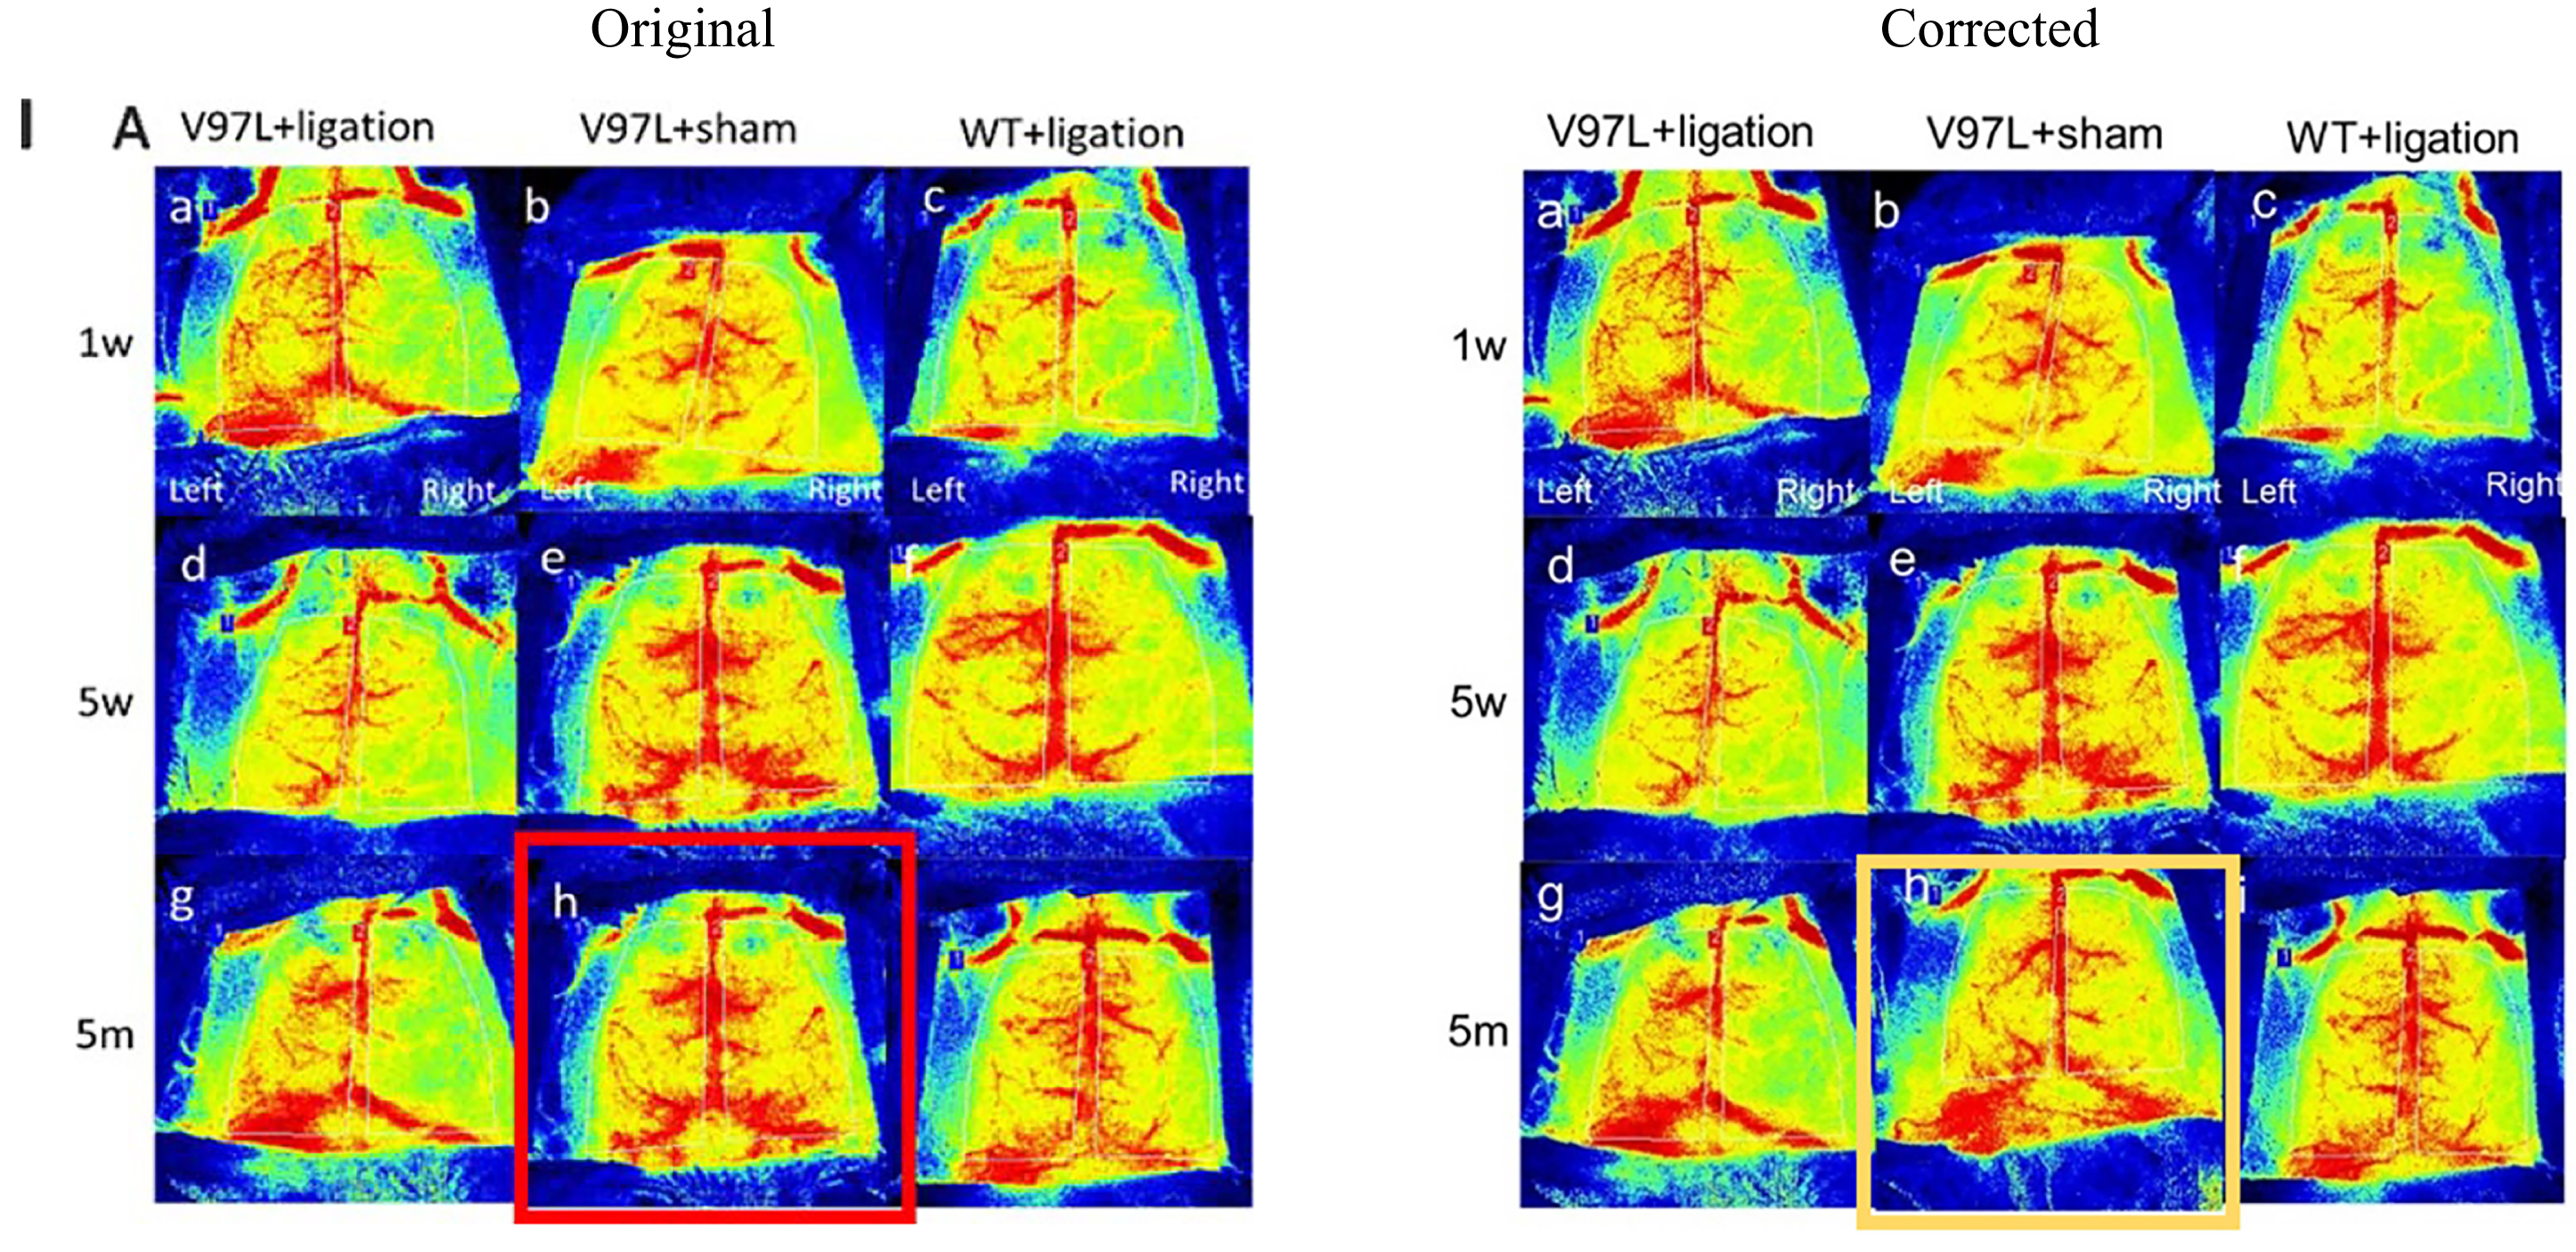 A mouse model of Alzheimer’s disease with chronic cerebral hypoperfusion was successfully developed, as indicated by disrupted cognitive function. Part I shows that (A) PS1V97L + ligation, PS1V97L + sham, and wild type (WT) + ligation mice were subjected to laser speckle blood flow monitoring to determine their cerebral blood flow (CBF) at 1 week, 5 weeks, and 5 months after surgery.